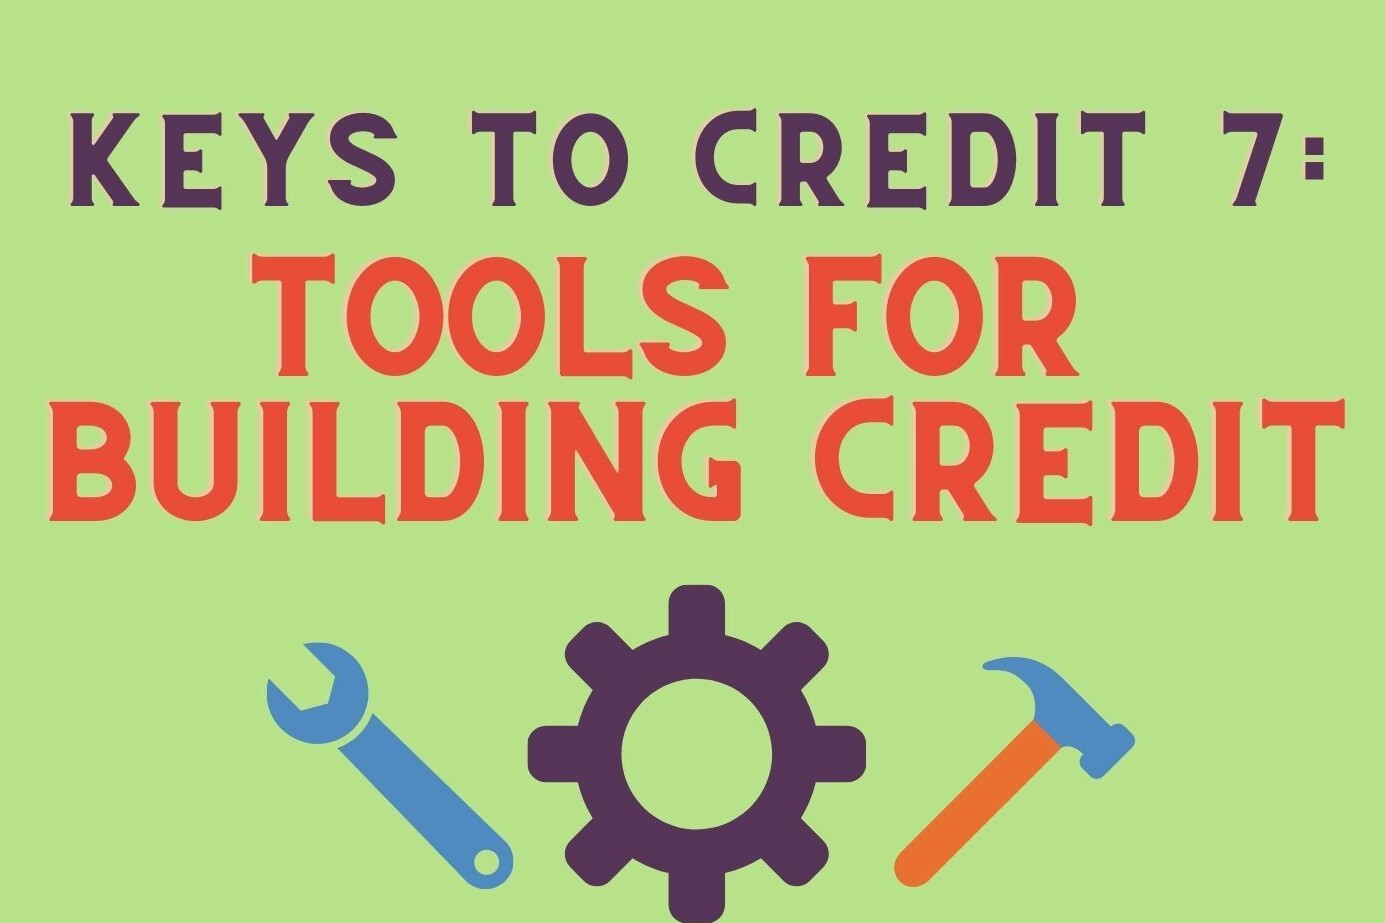 Keys to Credit 7: Tools for Building Credit